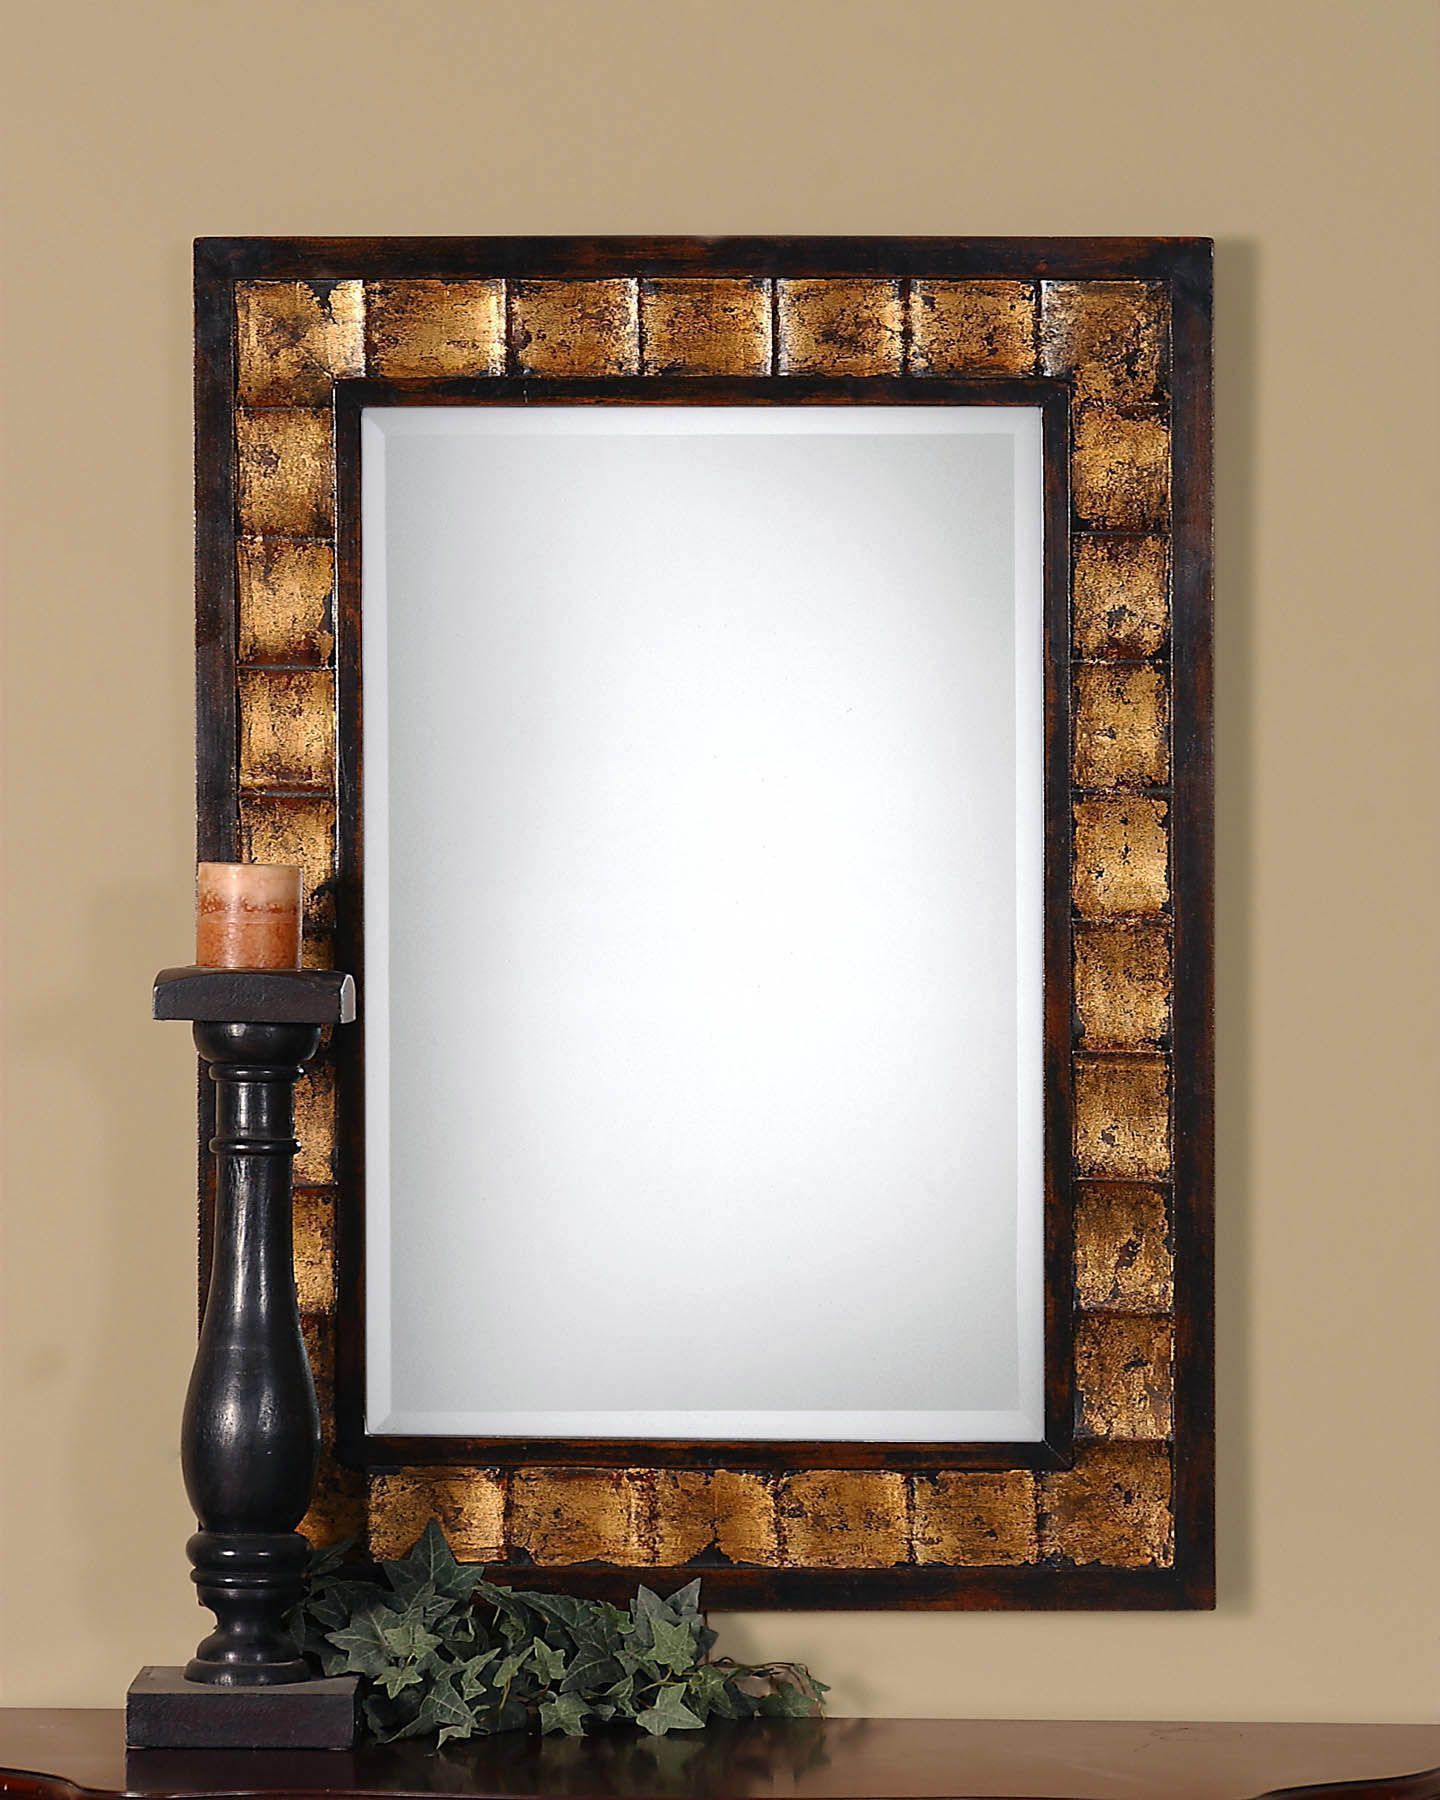 This Decorative Mirror Features A Frame Finished In Distressed Mahogany Regarding Mahogany Accent Wall Mirrors (View 3 of 15)